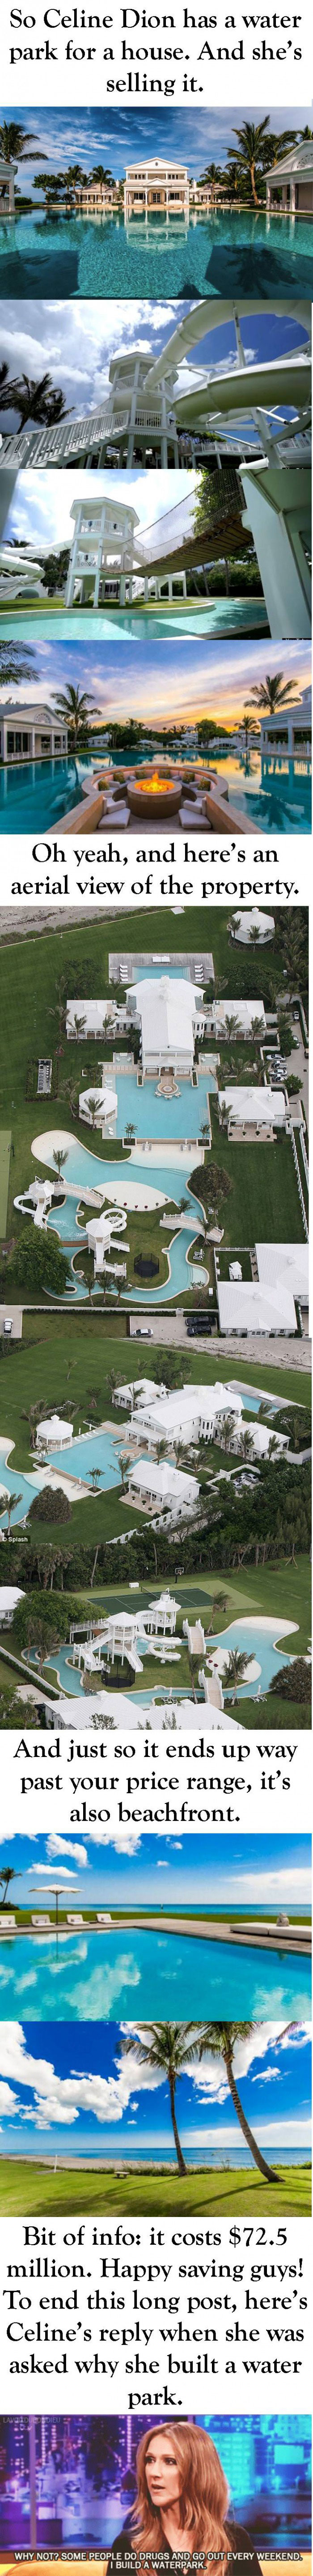 so celine dion is selling her house, water park, mansion